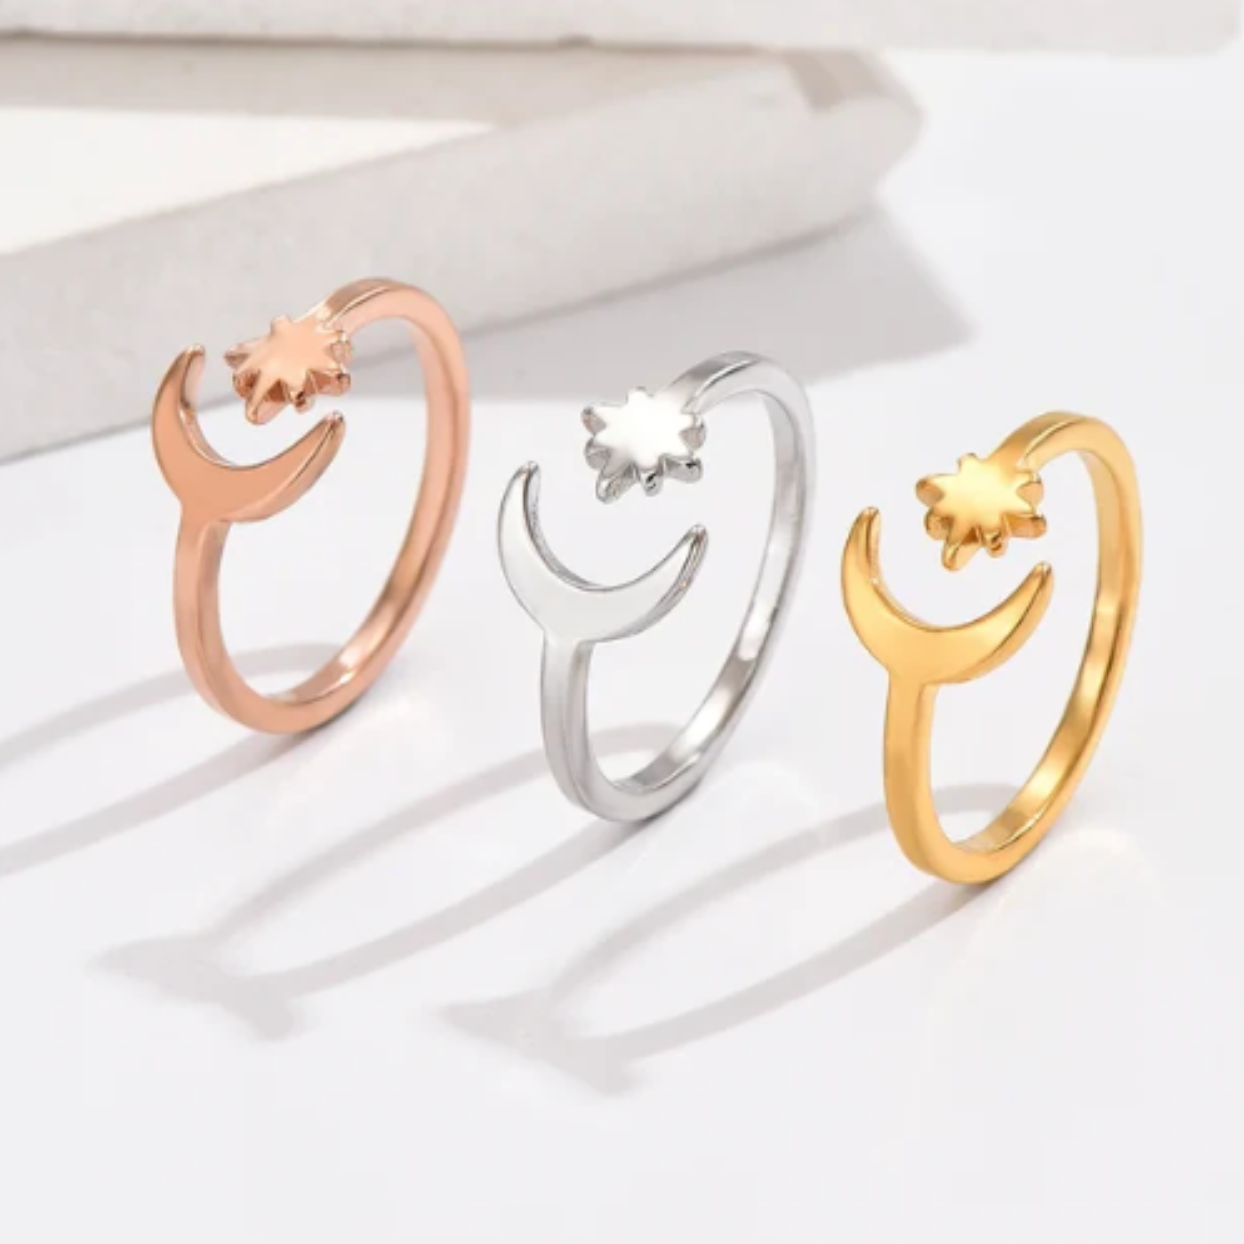 Rings | Handmade Rings in 18K Gold Vermeil, Ethical Sterling Silver & Solid  Gold – Temple of the Sun Jewellery